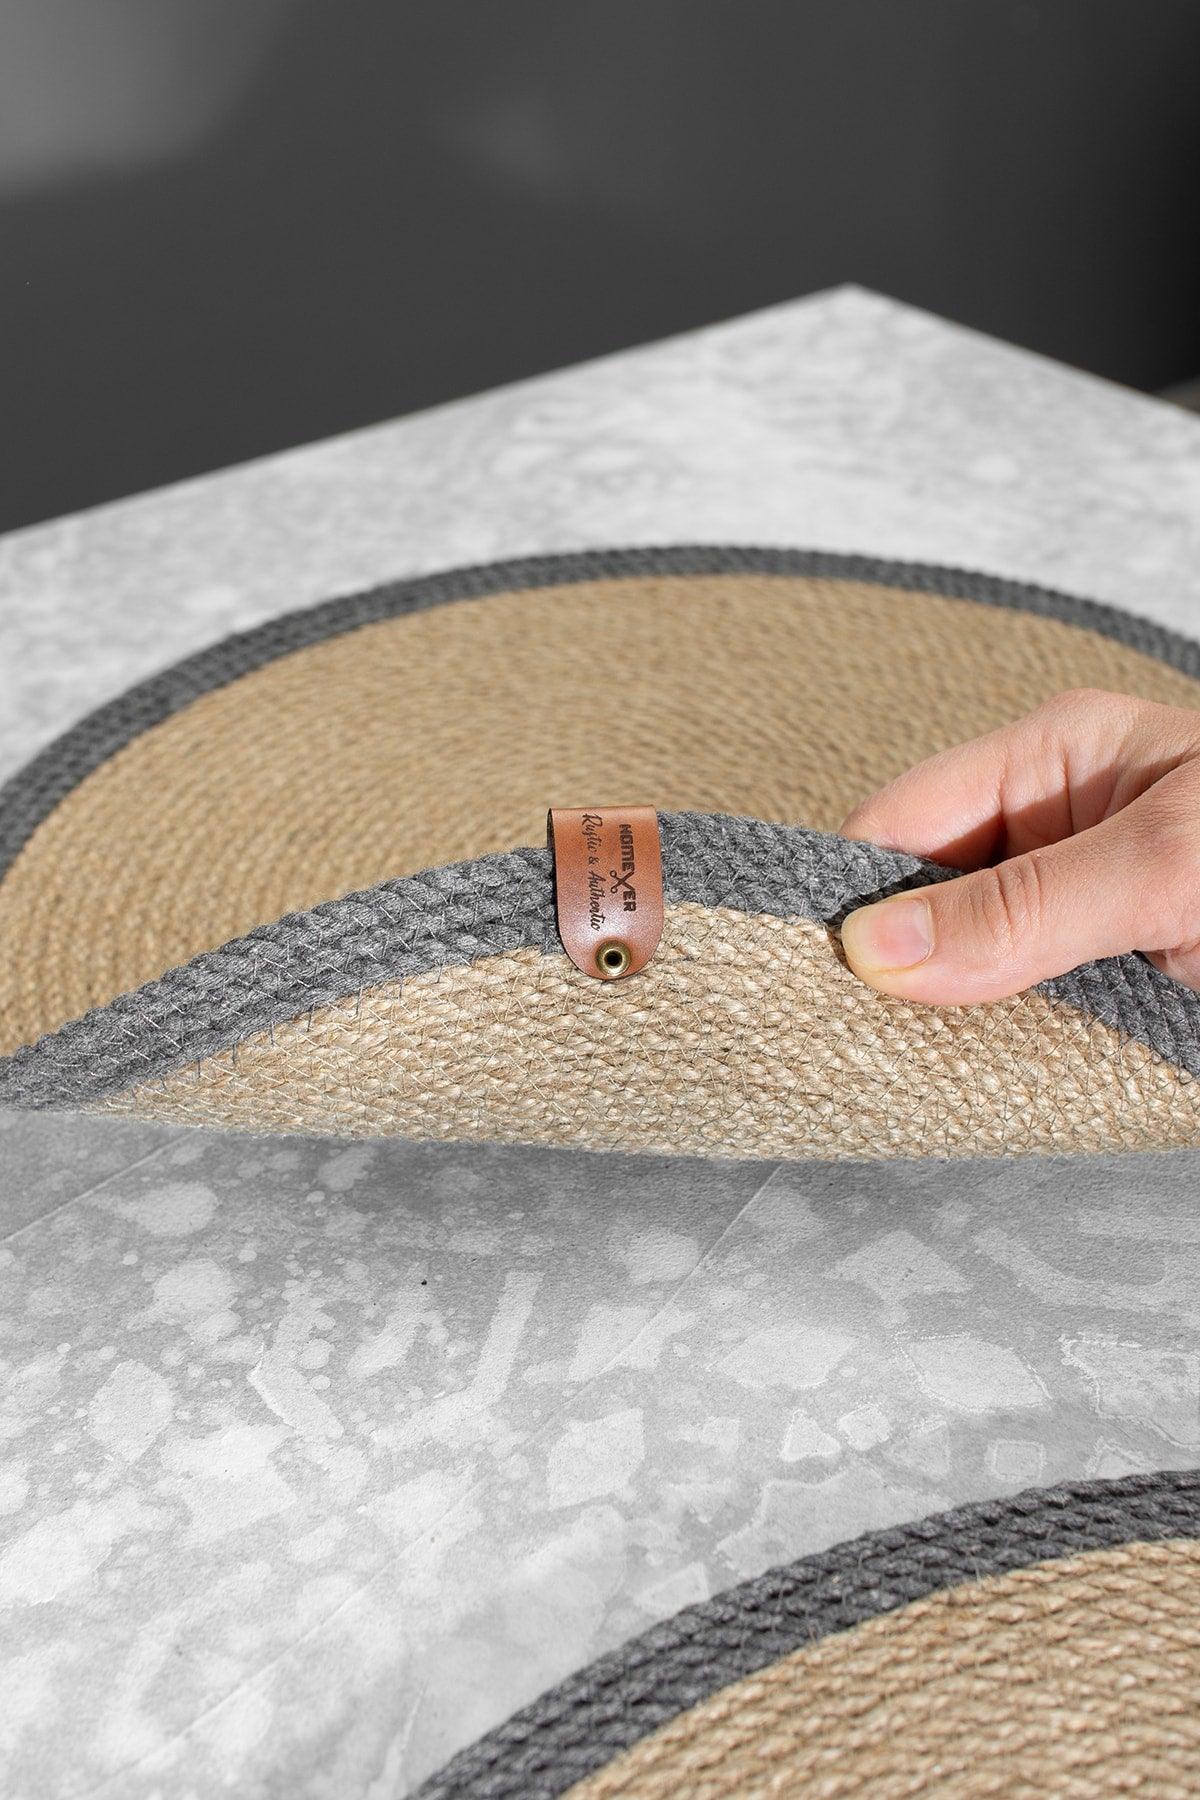 2 Pieces 32cm Round Gray Striped Placemats Straw Jute Knitted Base Presentation Set - Swordslife